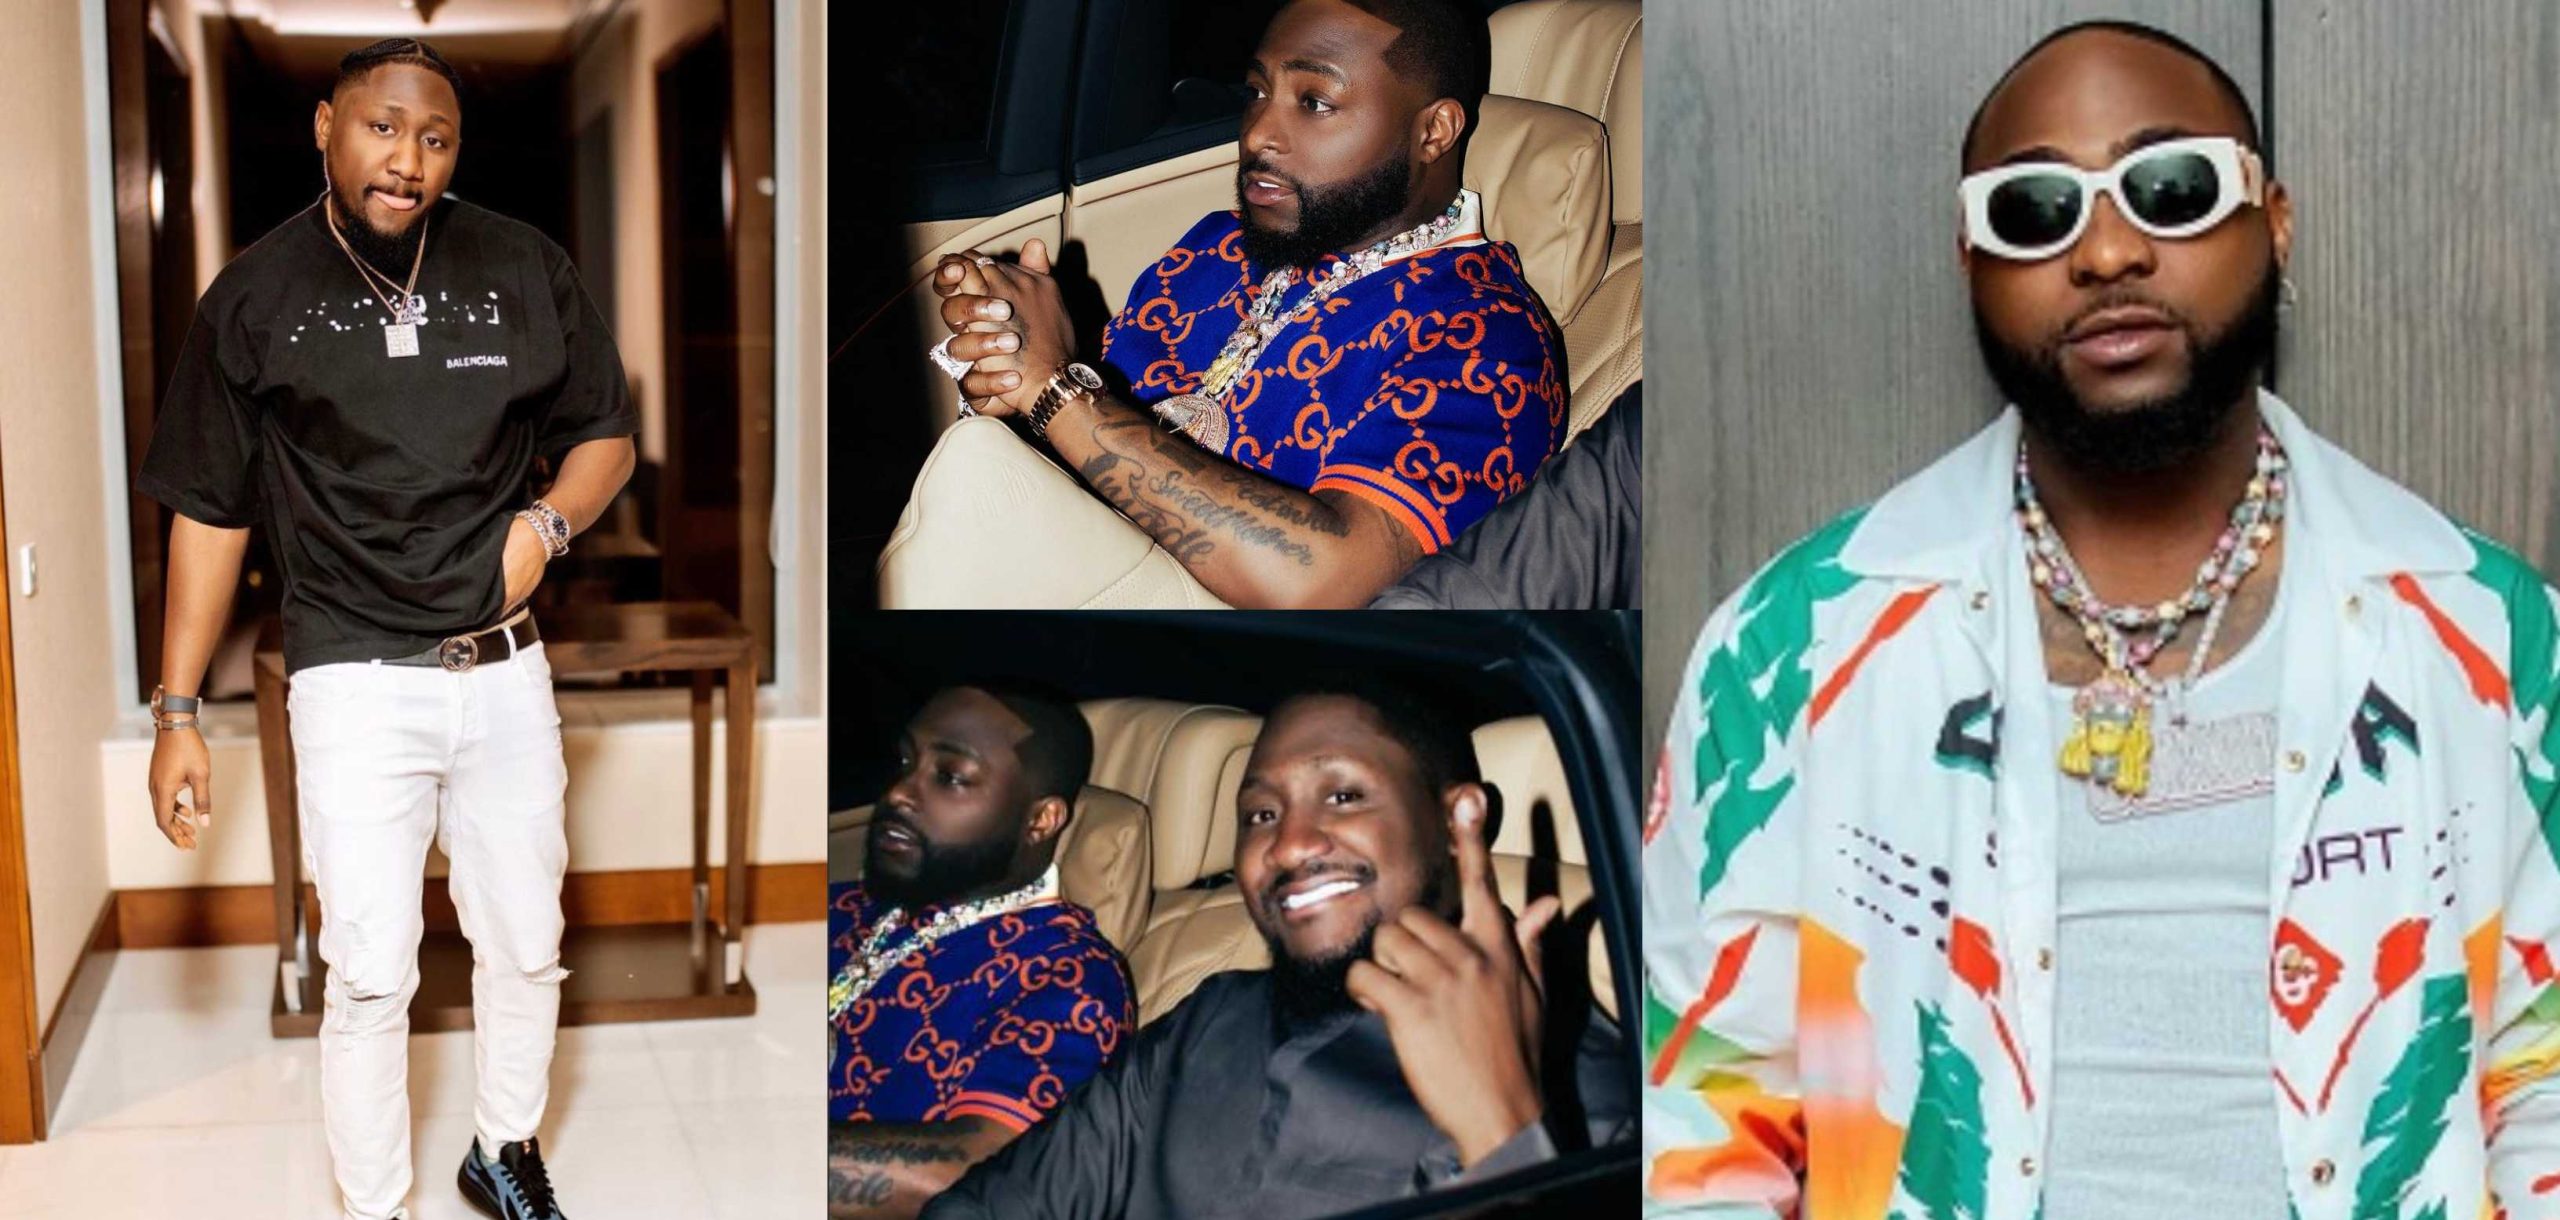 Tunji Adeleke reacts his cousin singer Davido for cropping him out of a photo